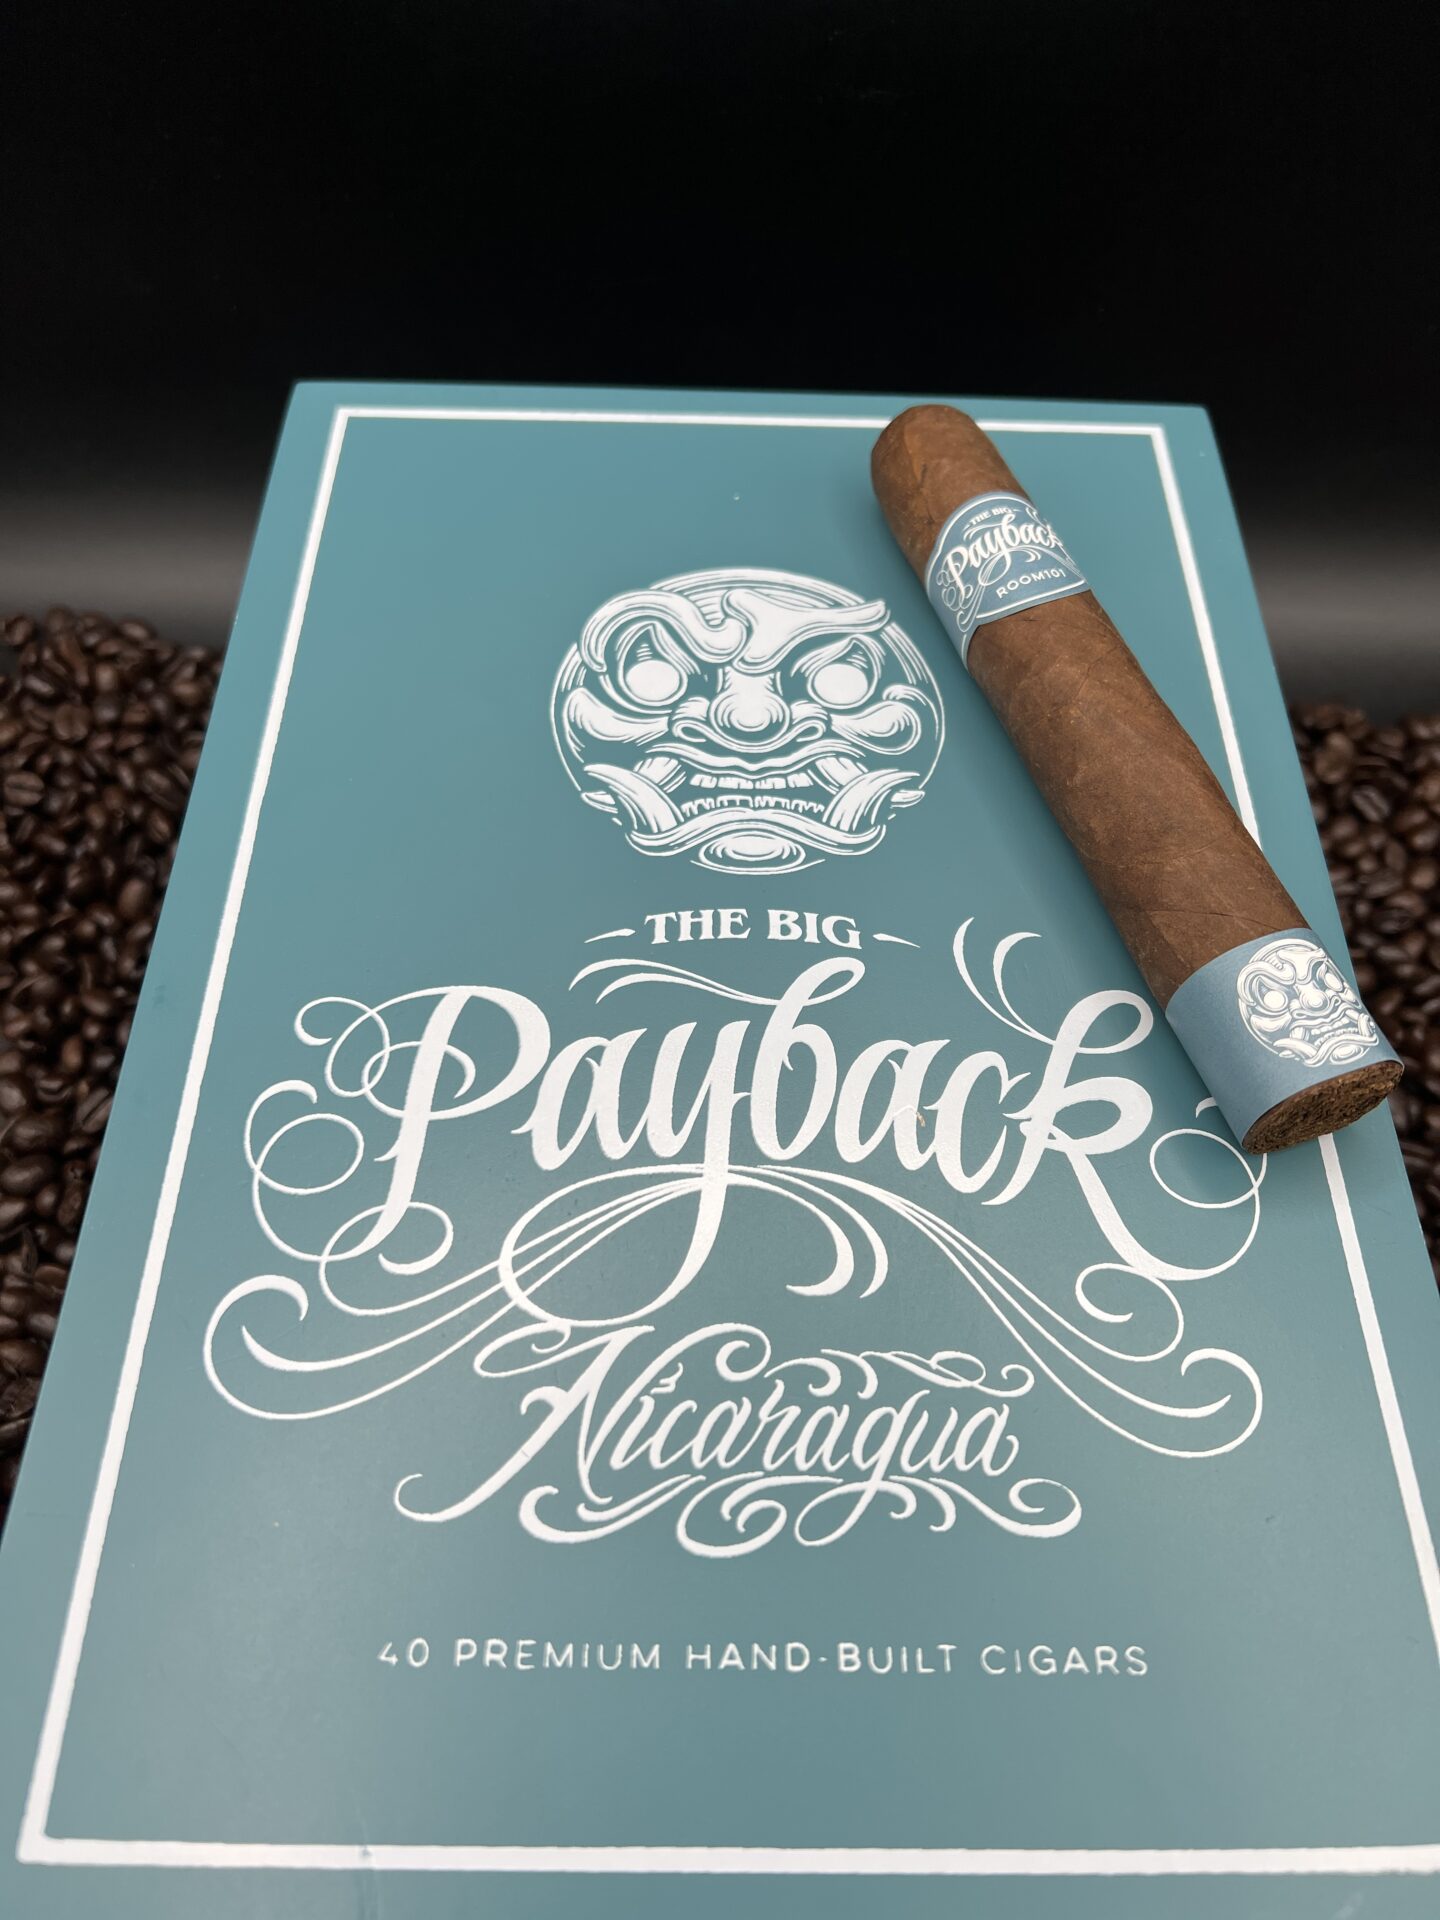 Room 101 - The Big Payback Nicaragua Gordo cigars supplied by Sir Louis Cigars